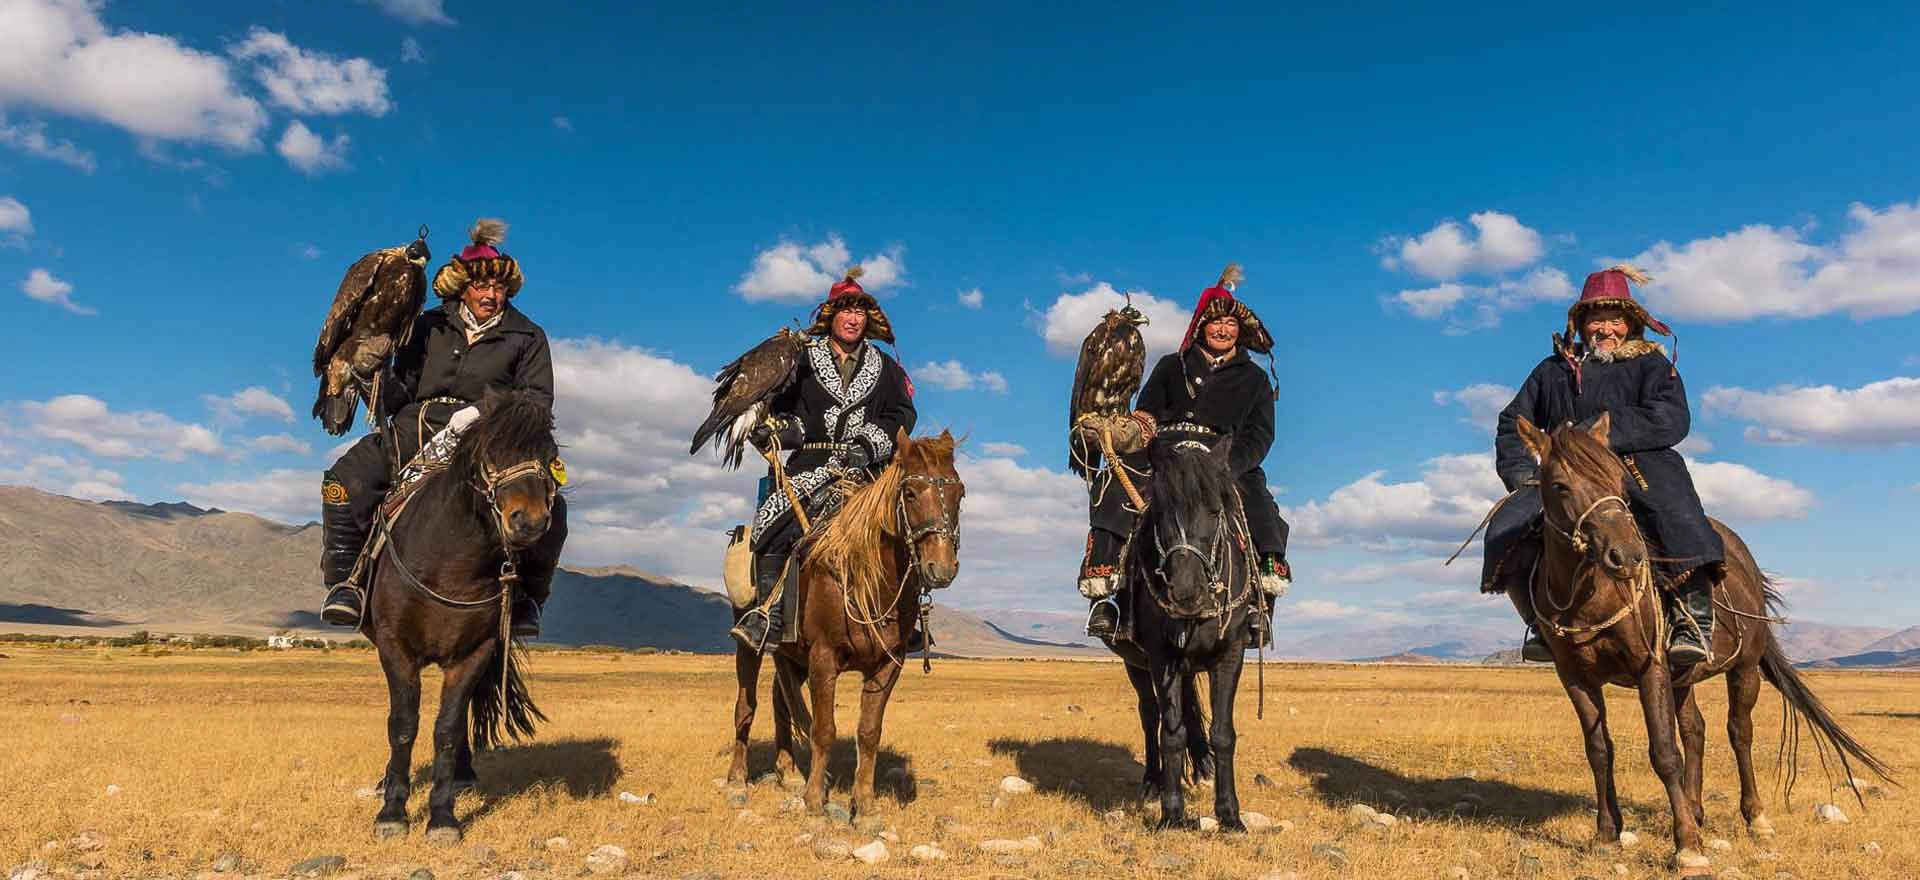 Eagle hunters in western Mongolia - Mongolia Holidays and Tours